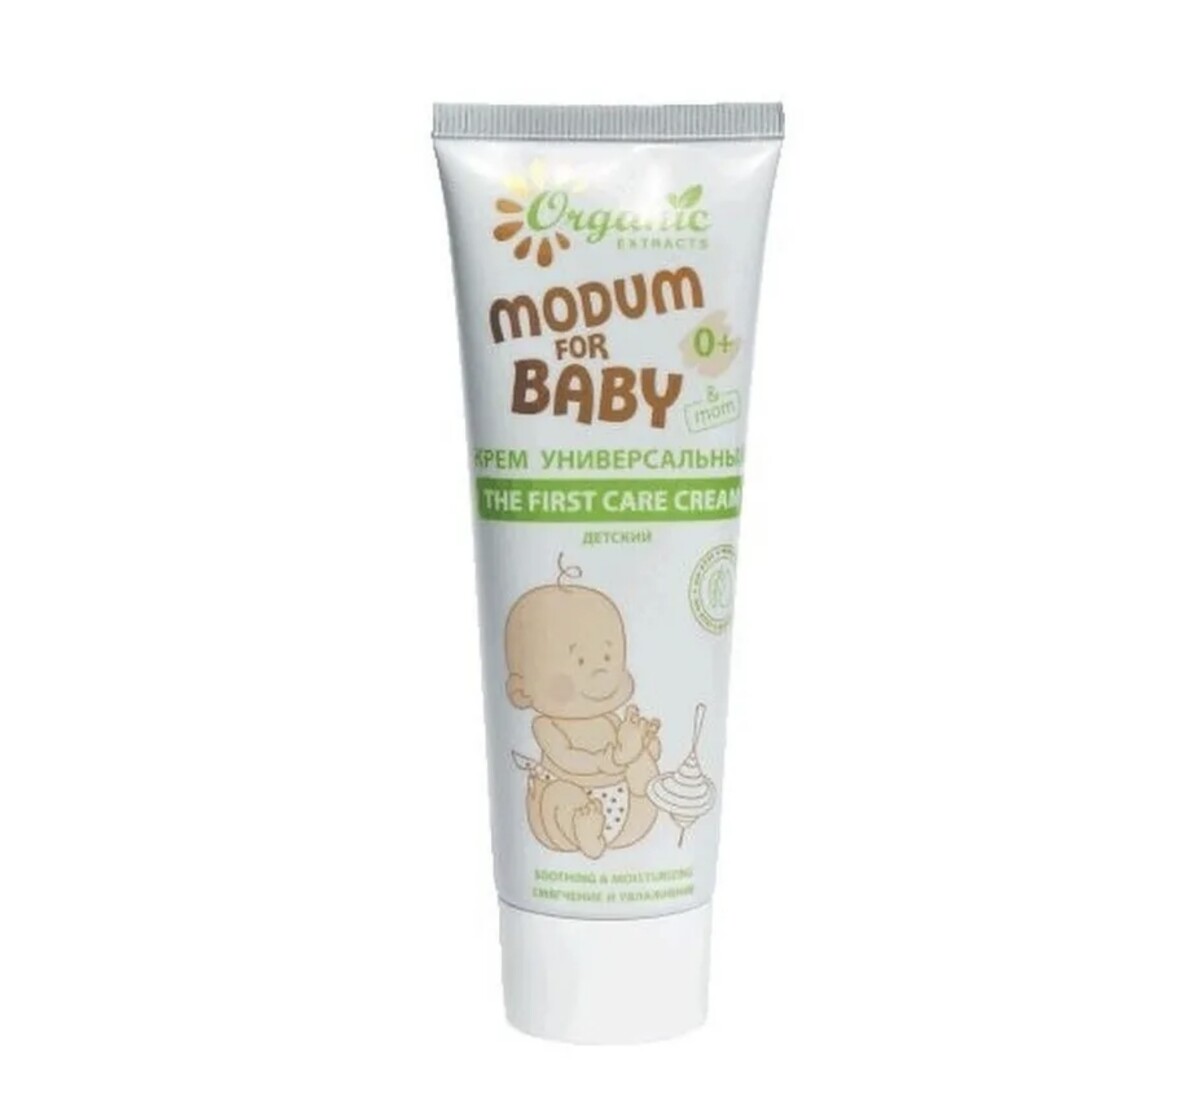 For baby   0+  the first care cream, 75